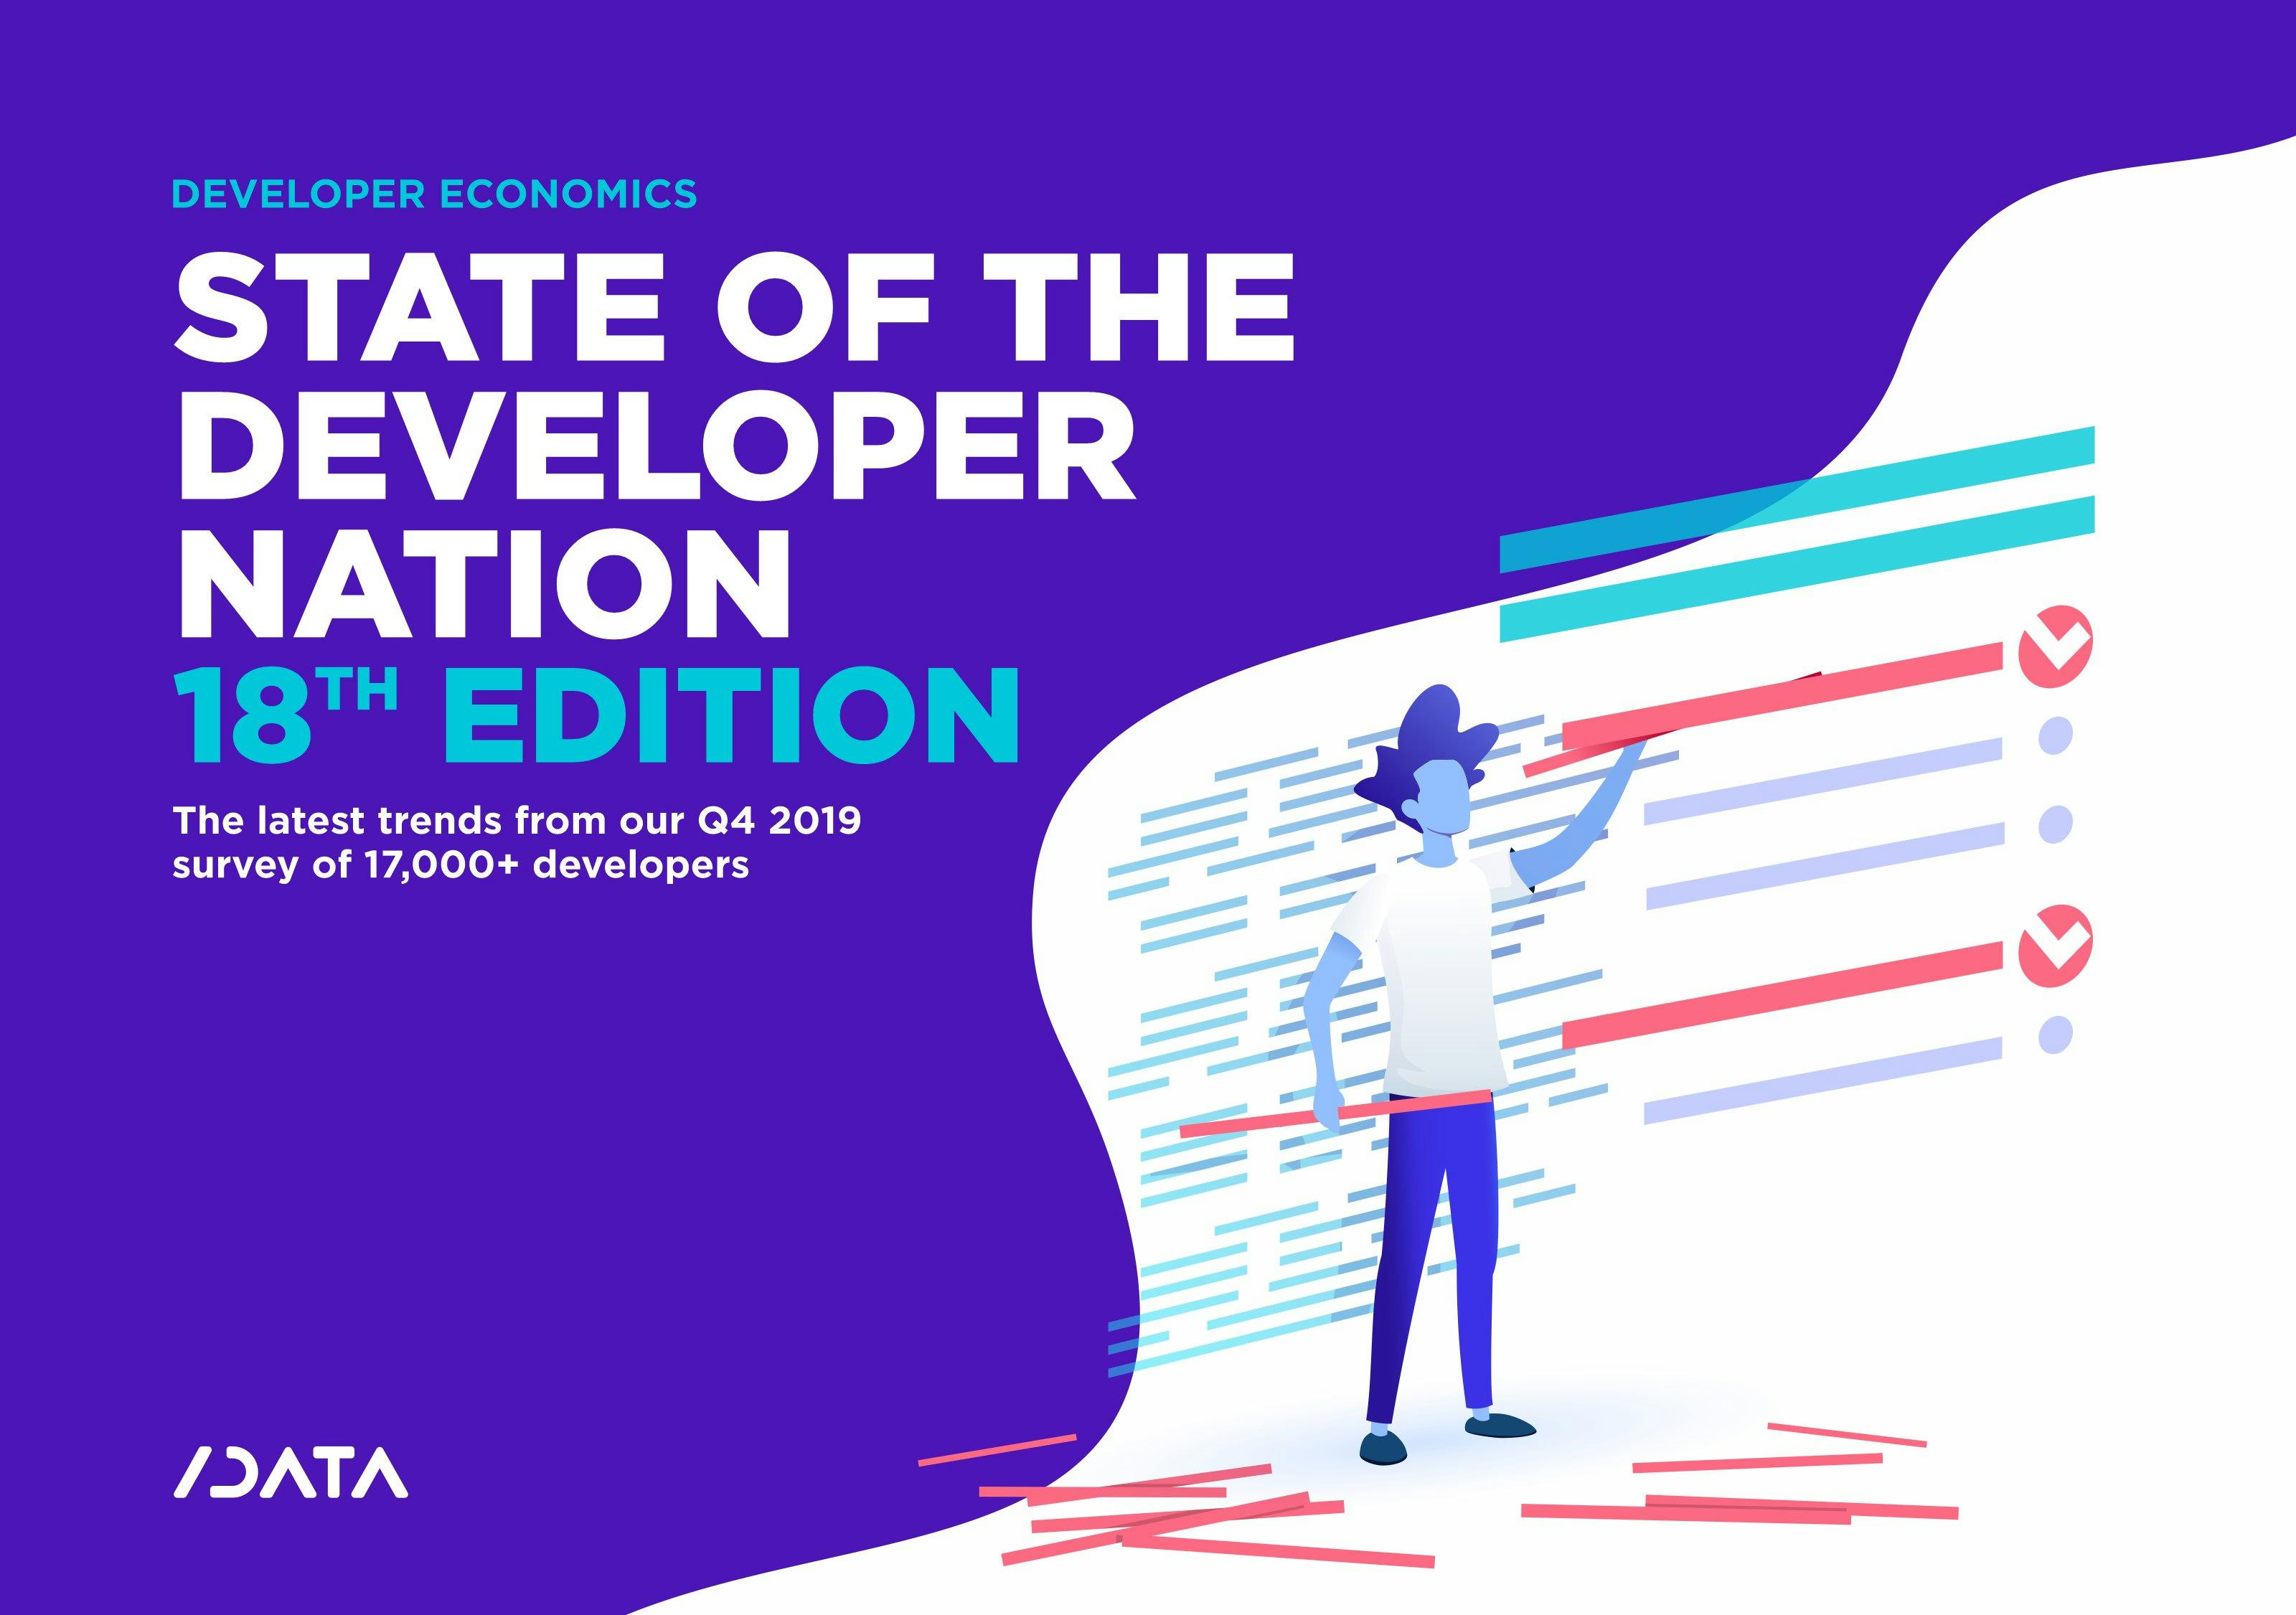 State of the Developer Nation 18th Edition - Q4 2019